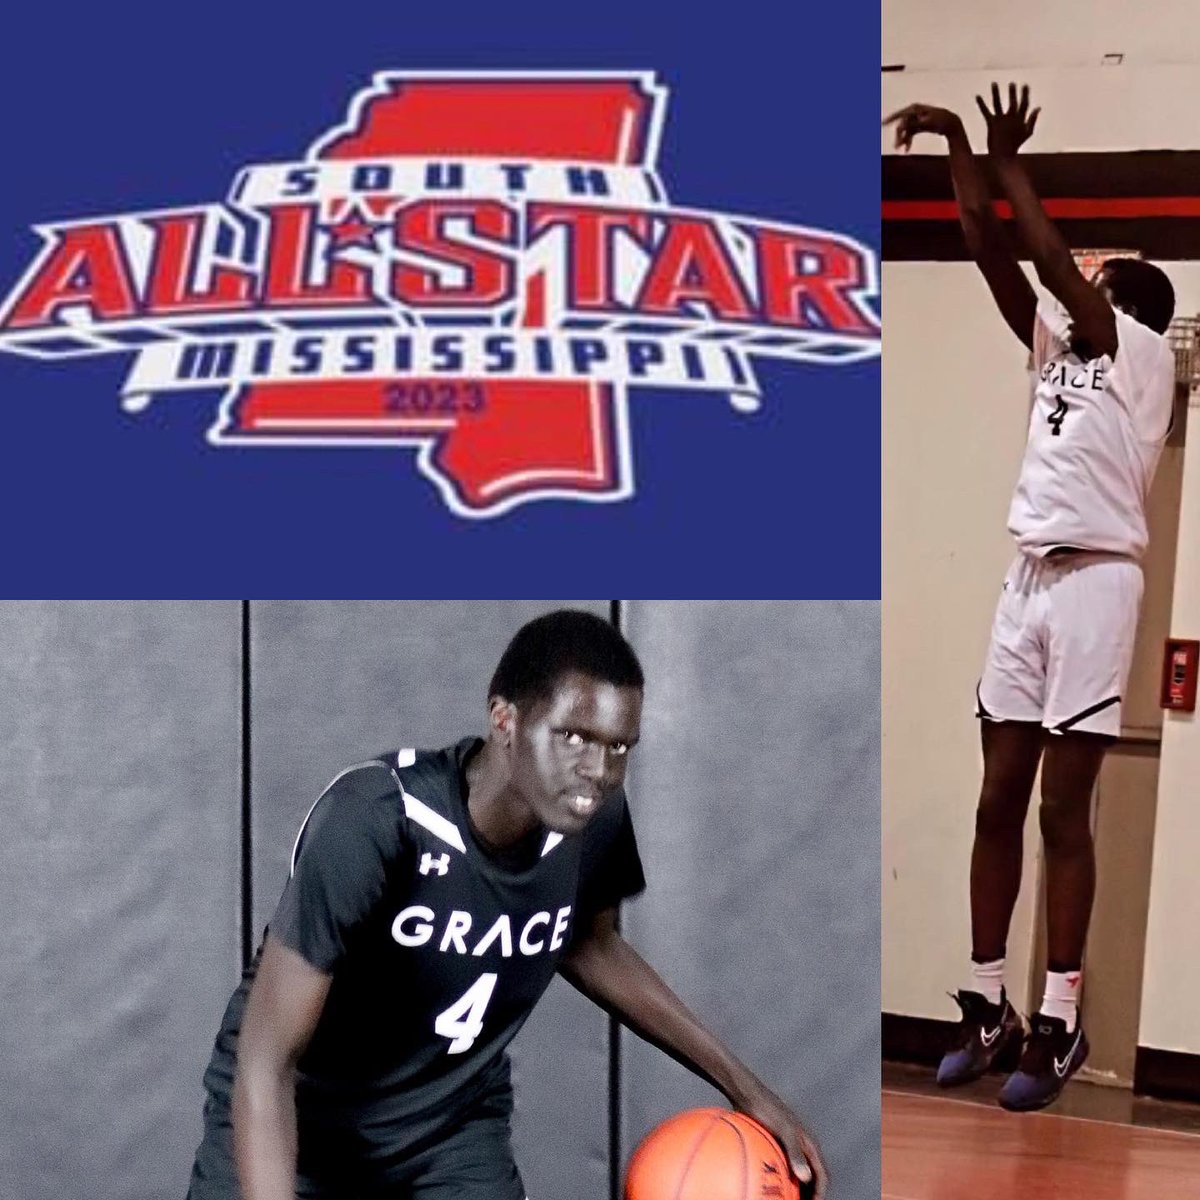 Congrats to GBA 6’8” SR G @44didi_ for making the South Mississippi All Star Game! @SSPHoops @southside_hoops @Relentless_Hoop @magnolia_hoops @Shoemanj @TMS_GULFCOAST @CommunitySaved @G2SHoops @AnsleyBrentTV